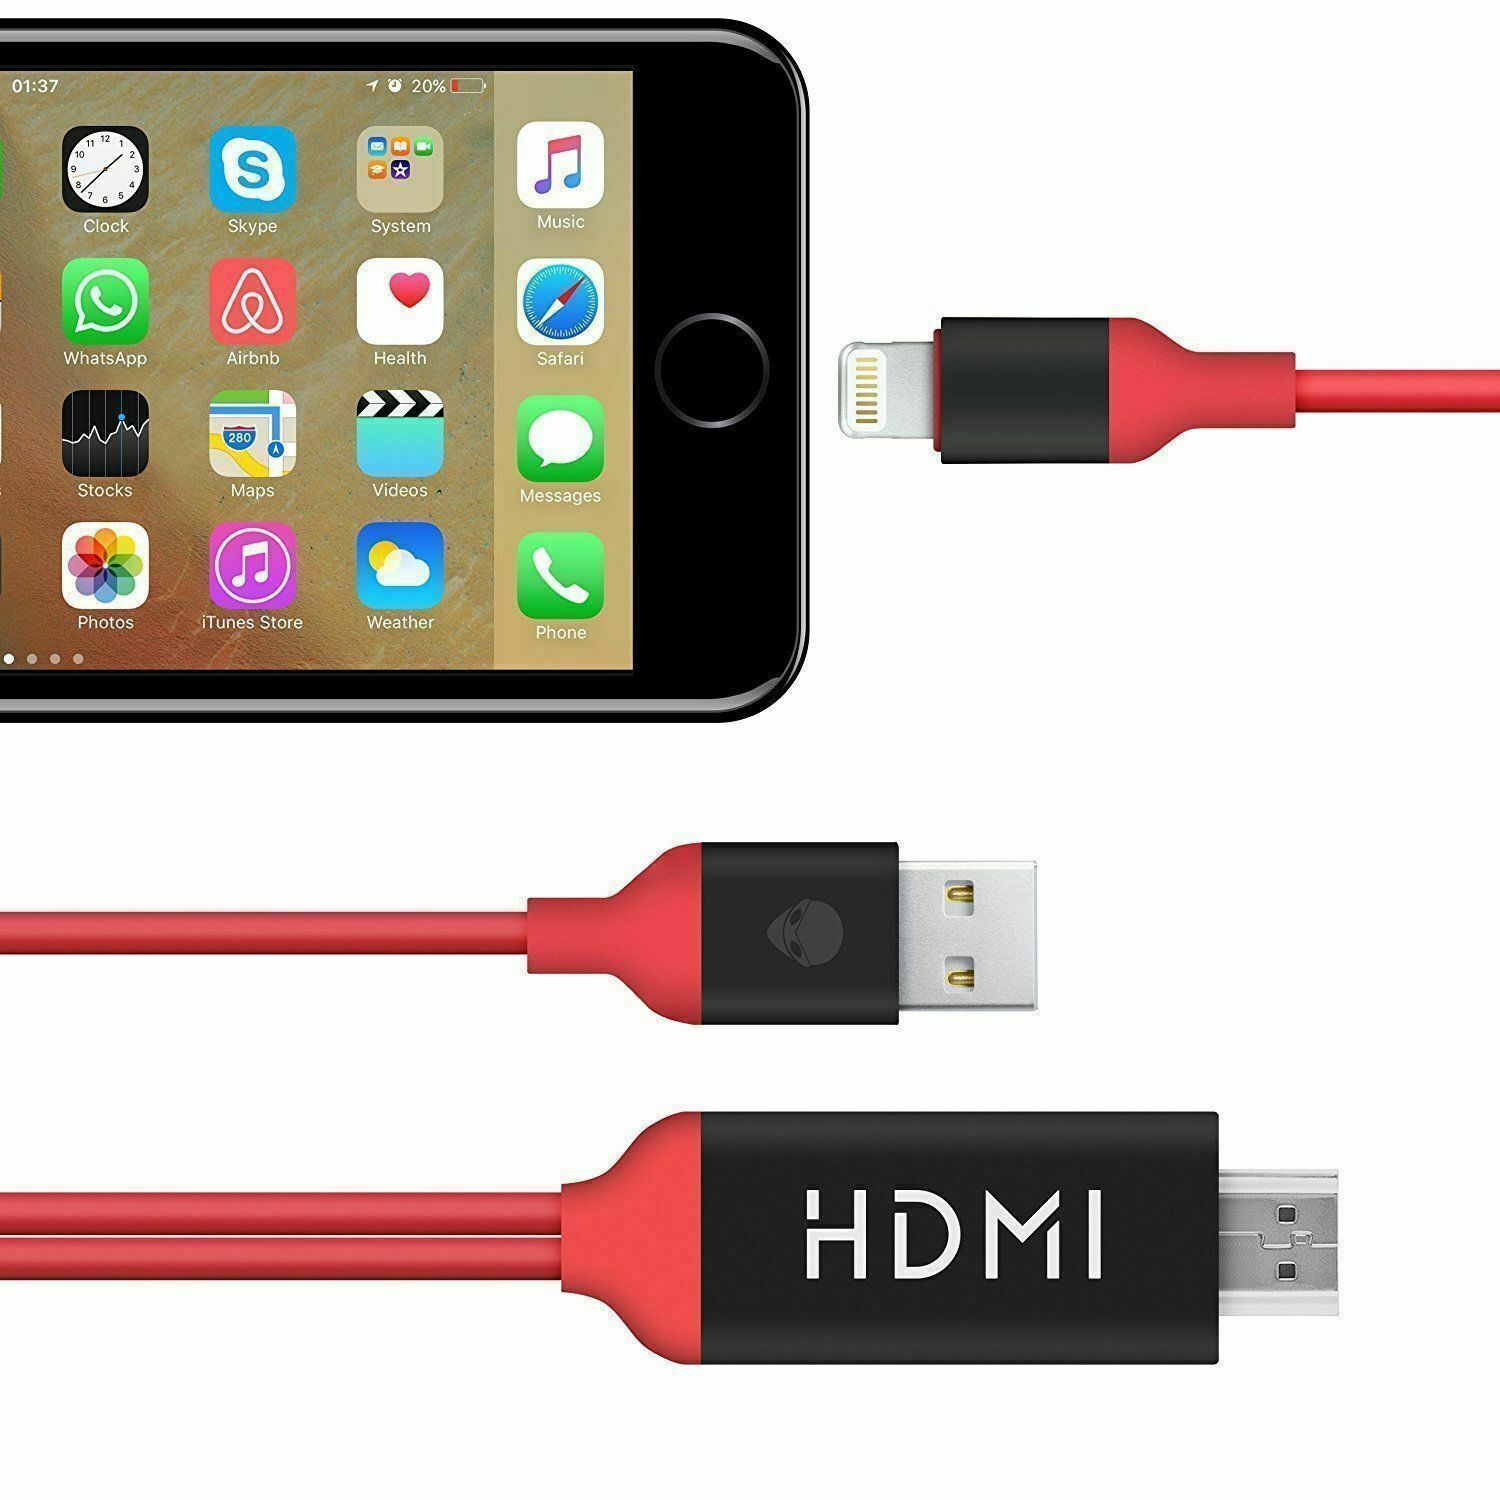 Buy 2M 8 Pin Lightning to HDMI Lead TV AV Cable Adapter For iPhone-Online Melbourne Sydney Adelaide Brisbane Perth Store Australia.Compatible with-iPhone I Pad